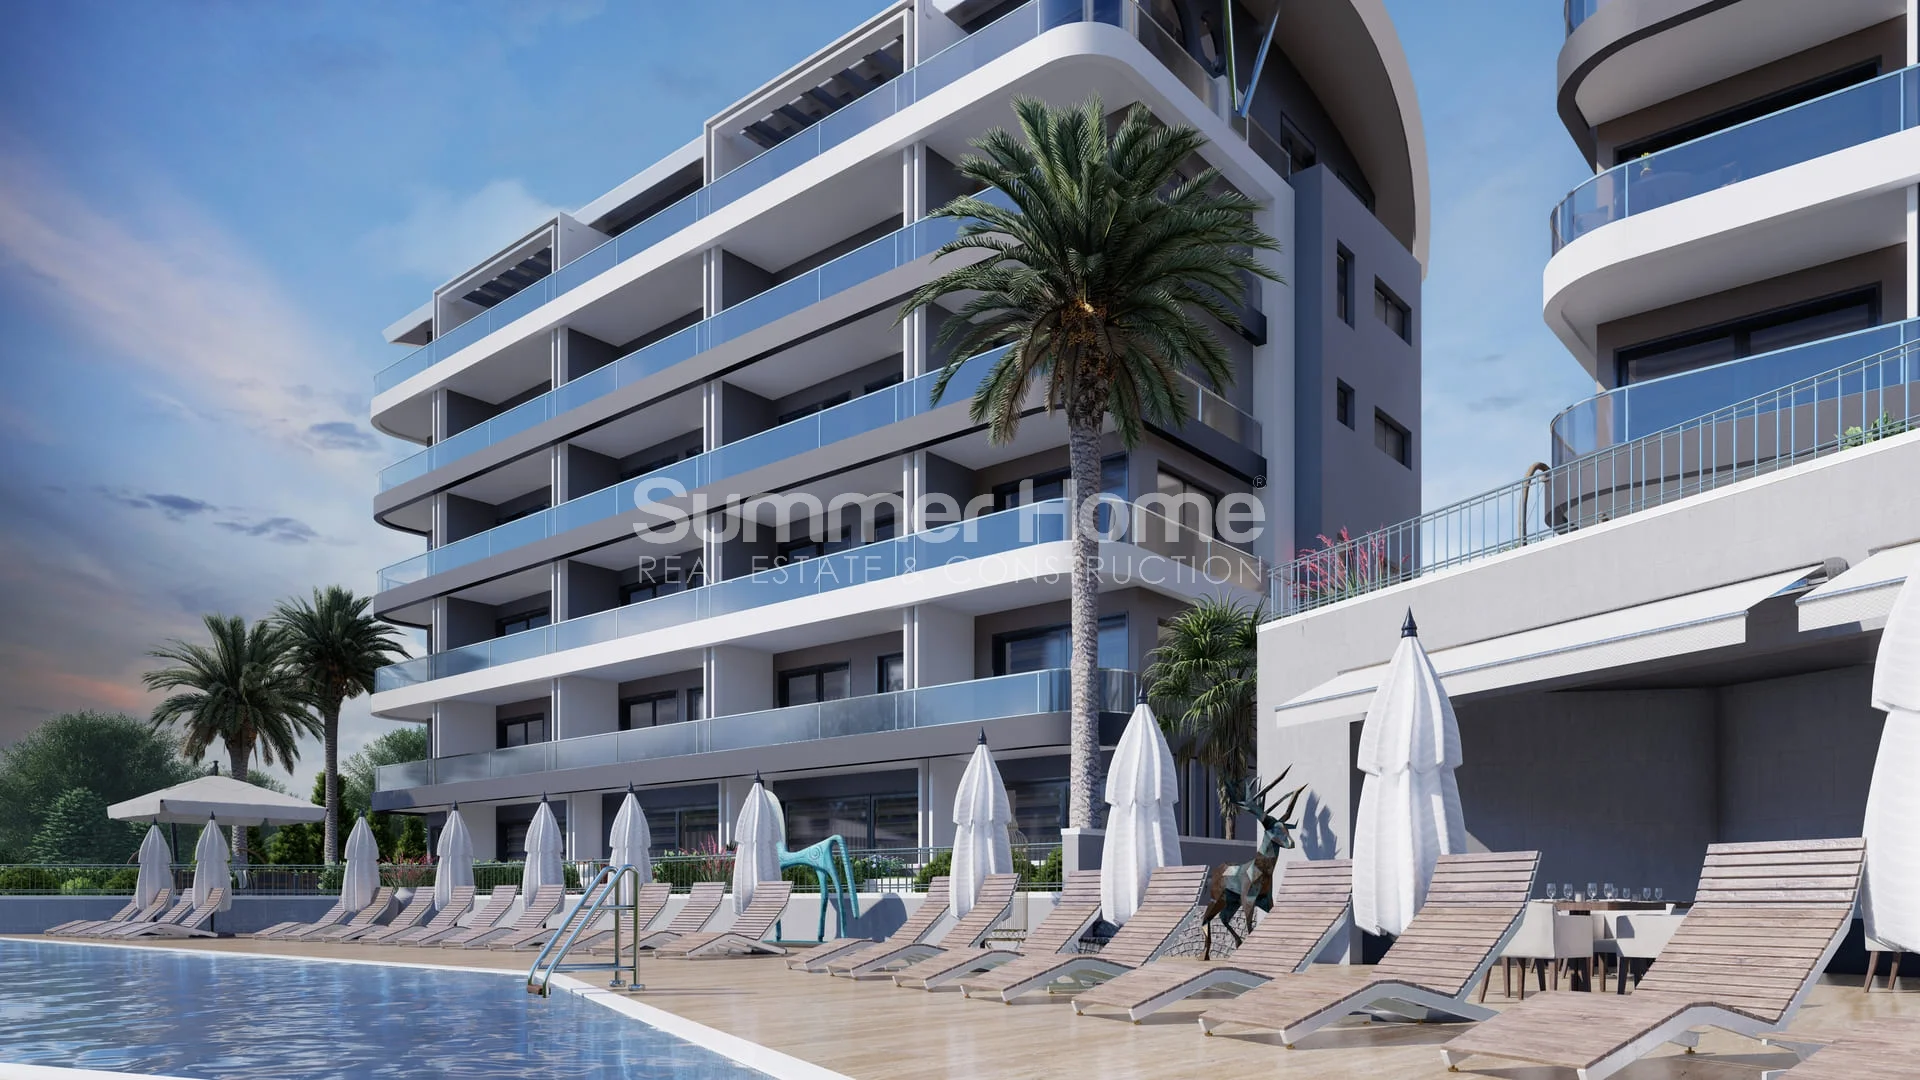 Stunning Sea-View Apartments For Sale in Kargicak General - 4